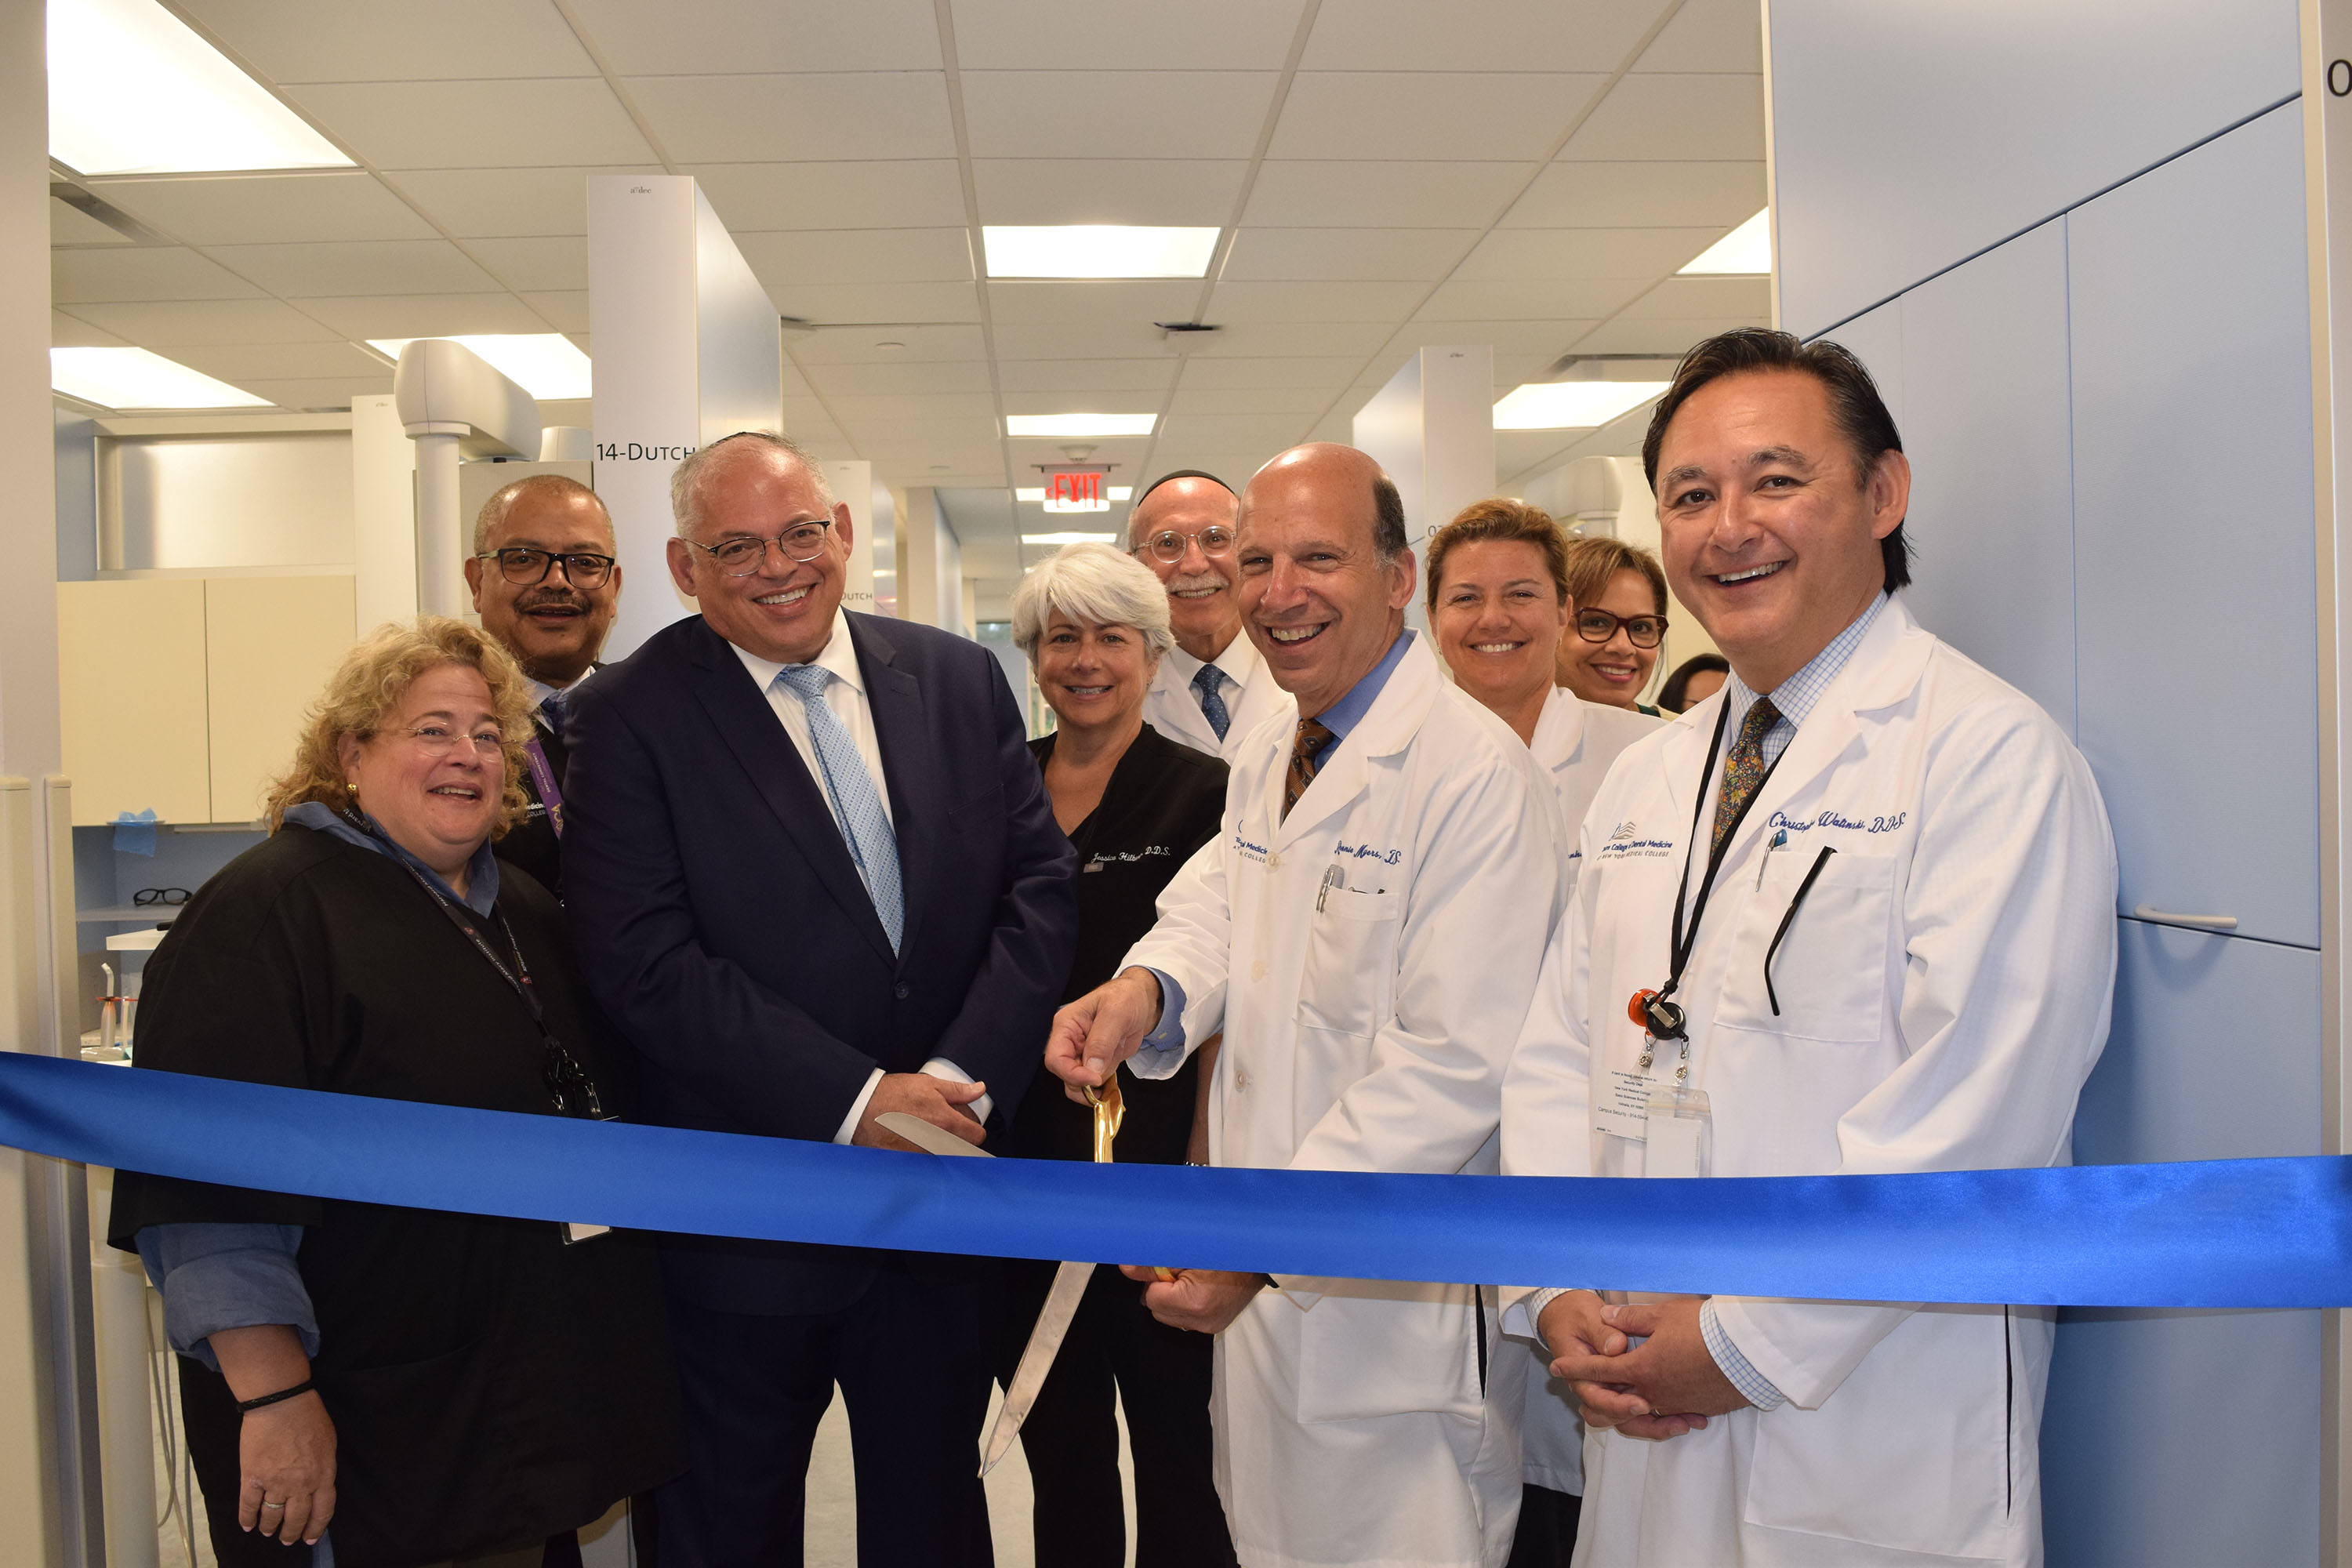 Leadership of Touro College of Dental Medicine cut the ribbon to the new clinical space.